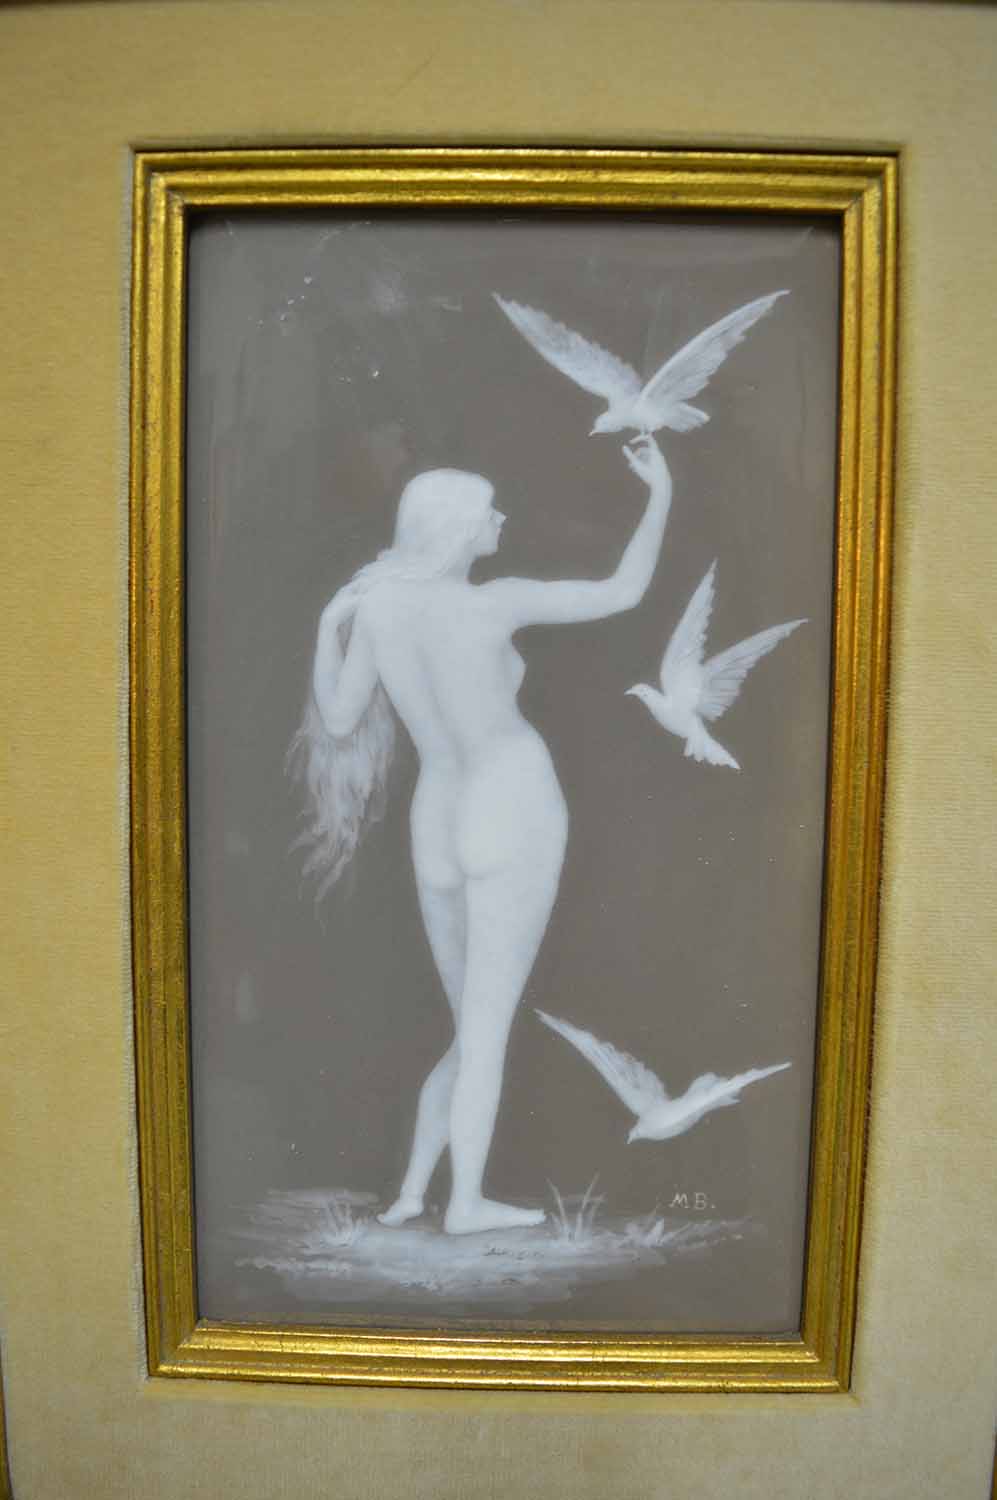 PATE SUR PATE PORCELAIN PLAQUE, depicting a naked lady and three doves, signed initials M B, - Image 2 of 2